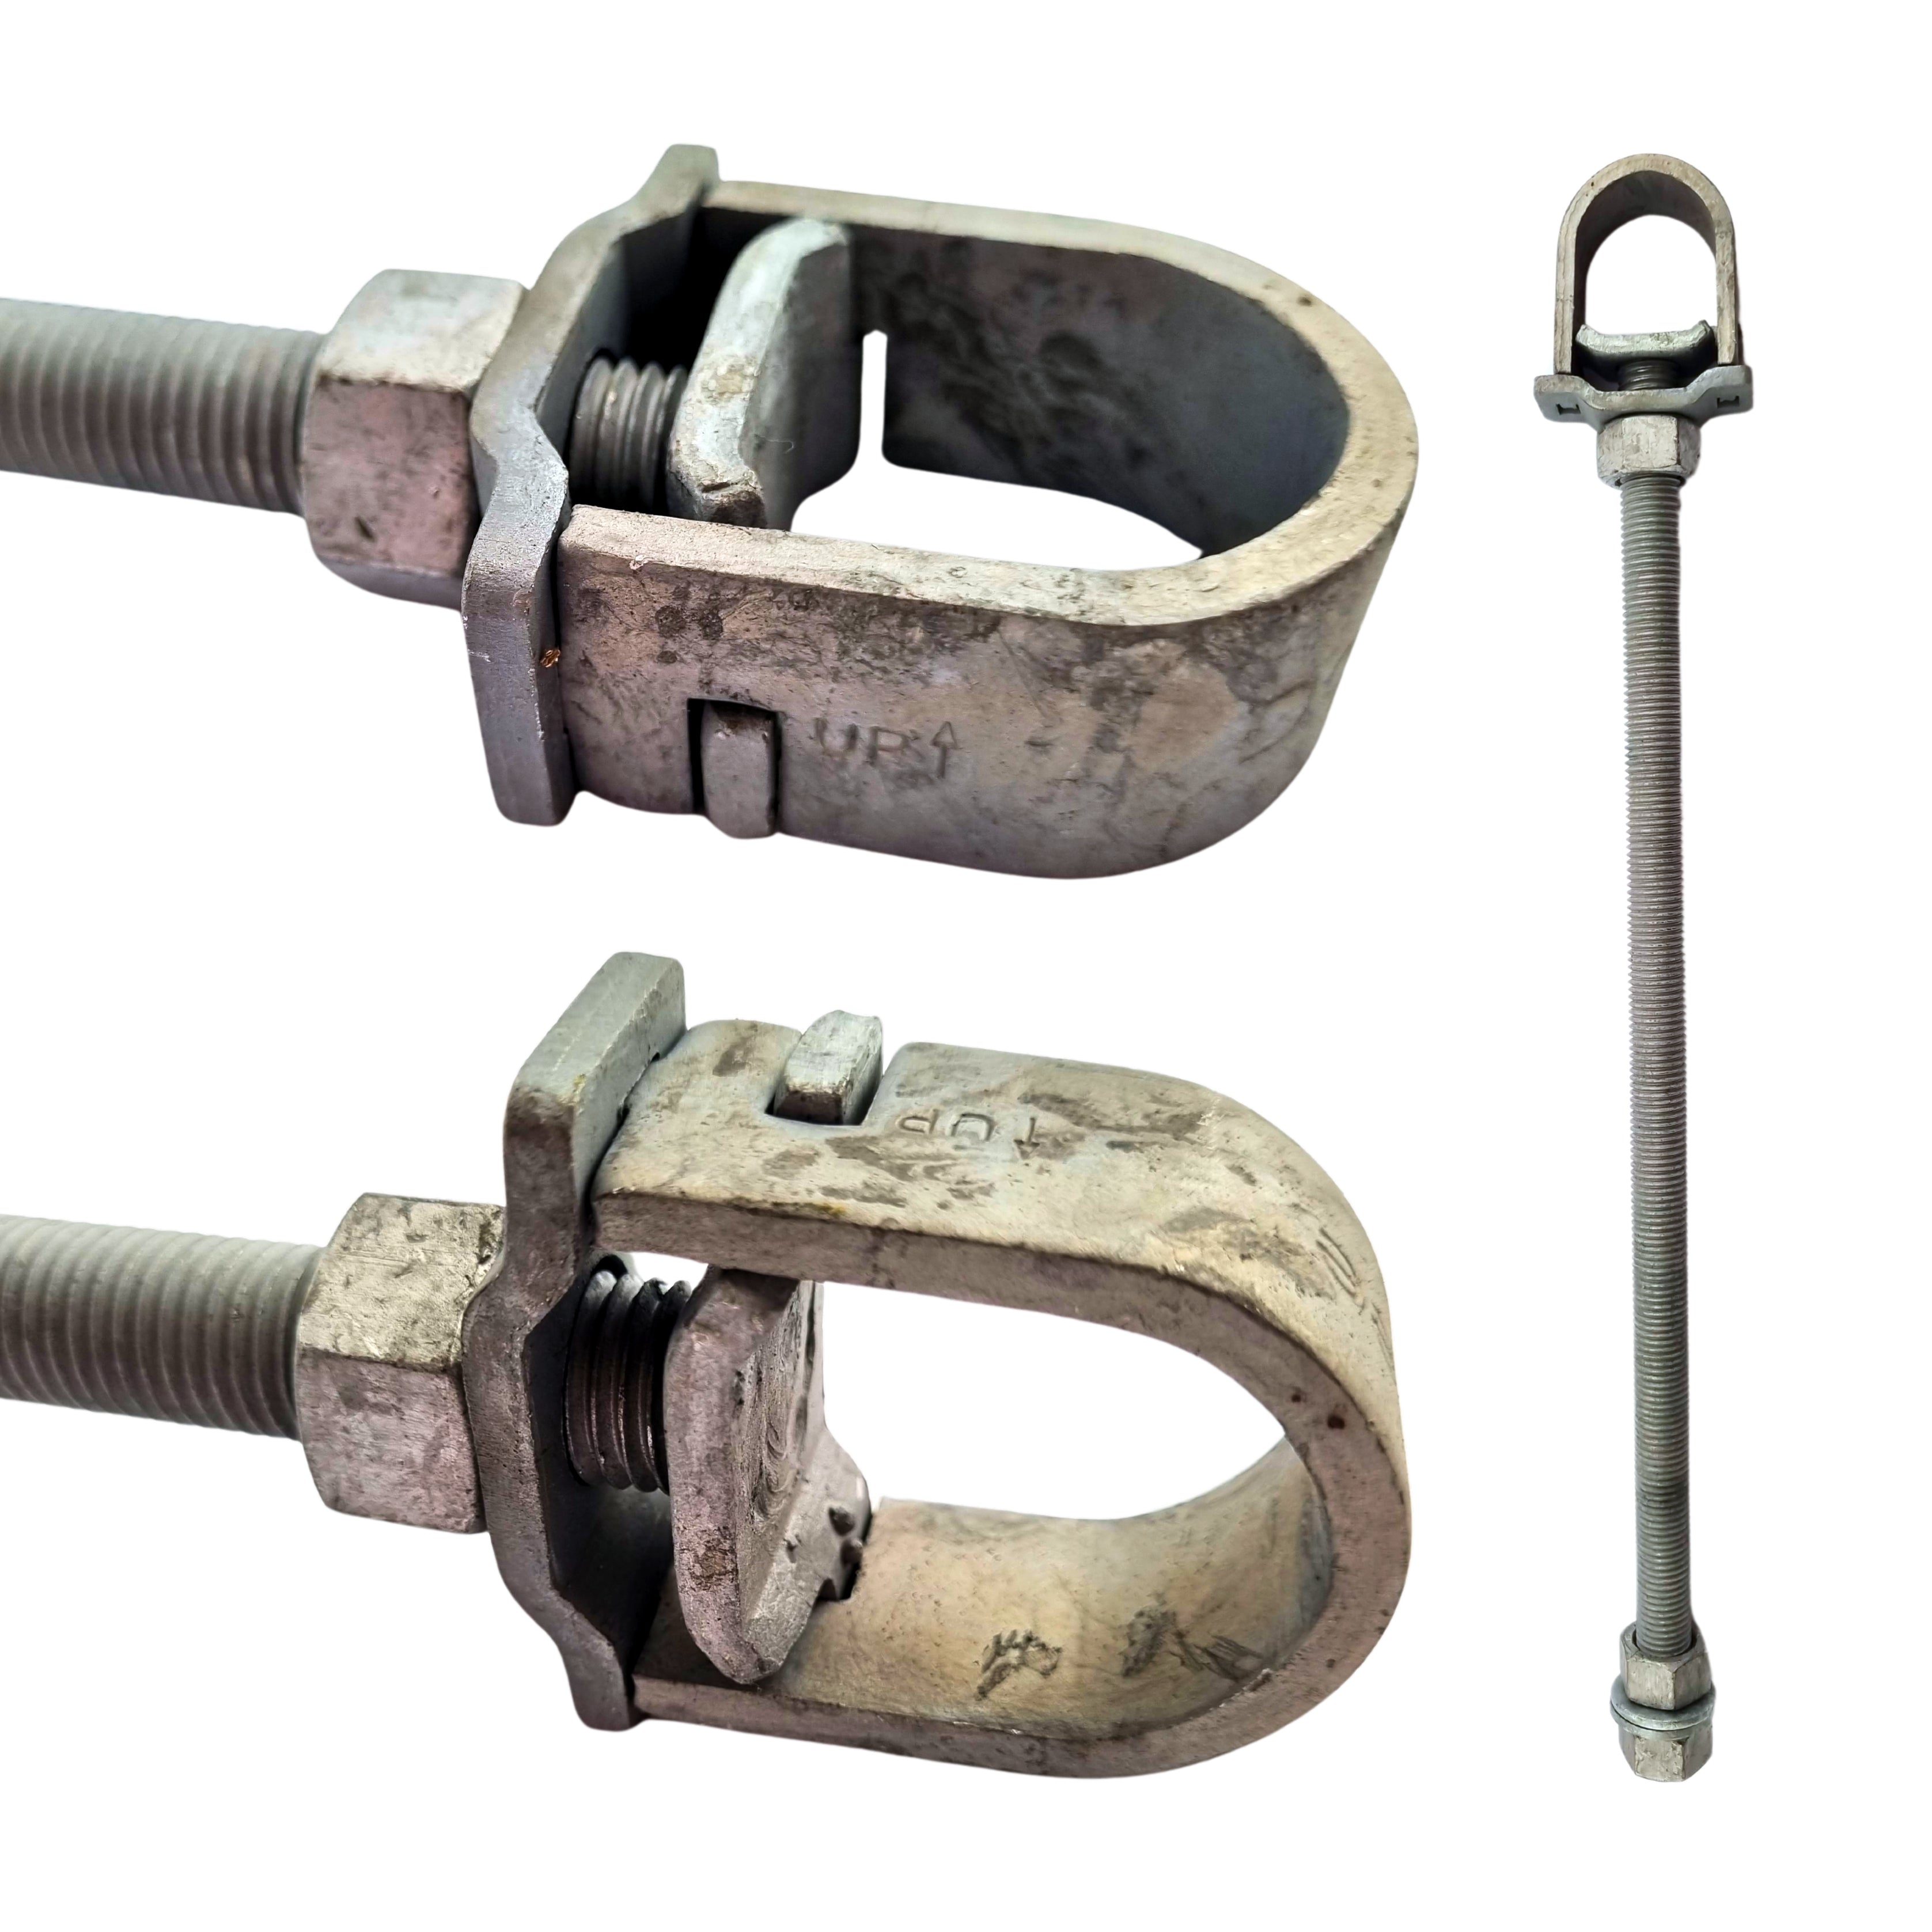 Timber Post Strap - Bolt Thru - Type A - Galvanised. Code: S7C & S8C. Australian Made. Fence & Gate Fittings. Shop online chain.com.au. Australia wide shipping.